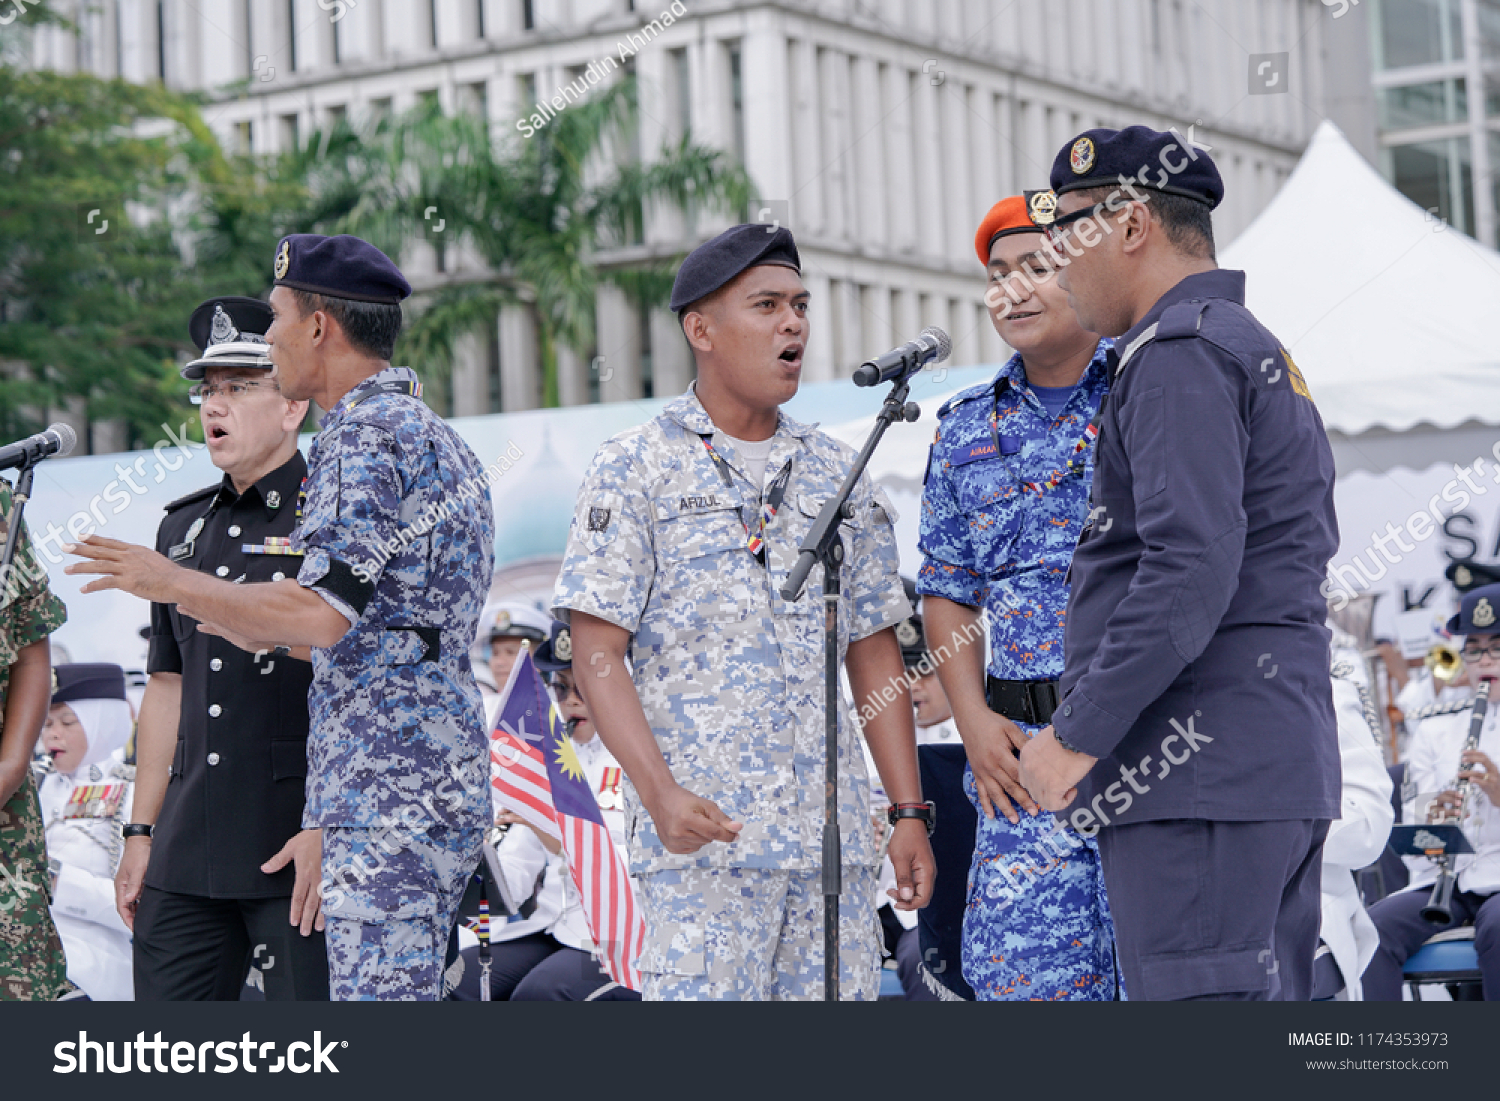 PUTRAJAYA, MALAYSIA - 31st AUG 2018; Army personnel performs on stage during the 61st Independence Day of Malaysia in Putrajaya, Malaysia.  #1174353973